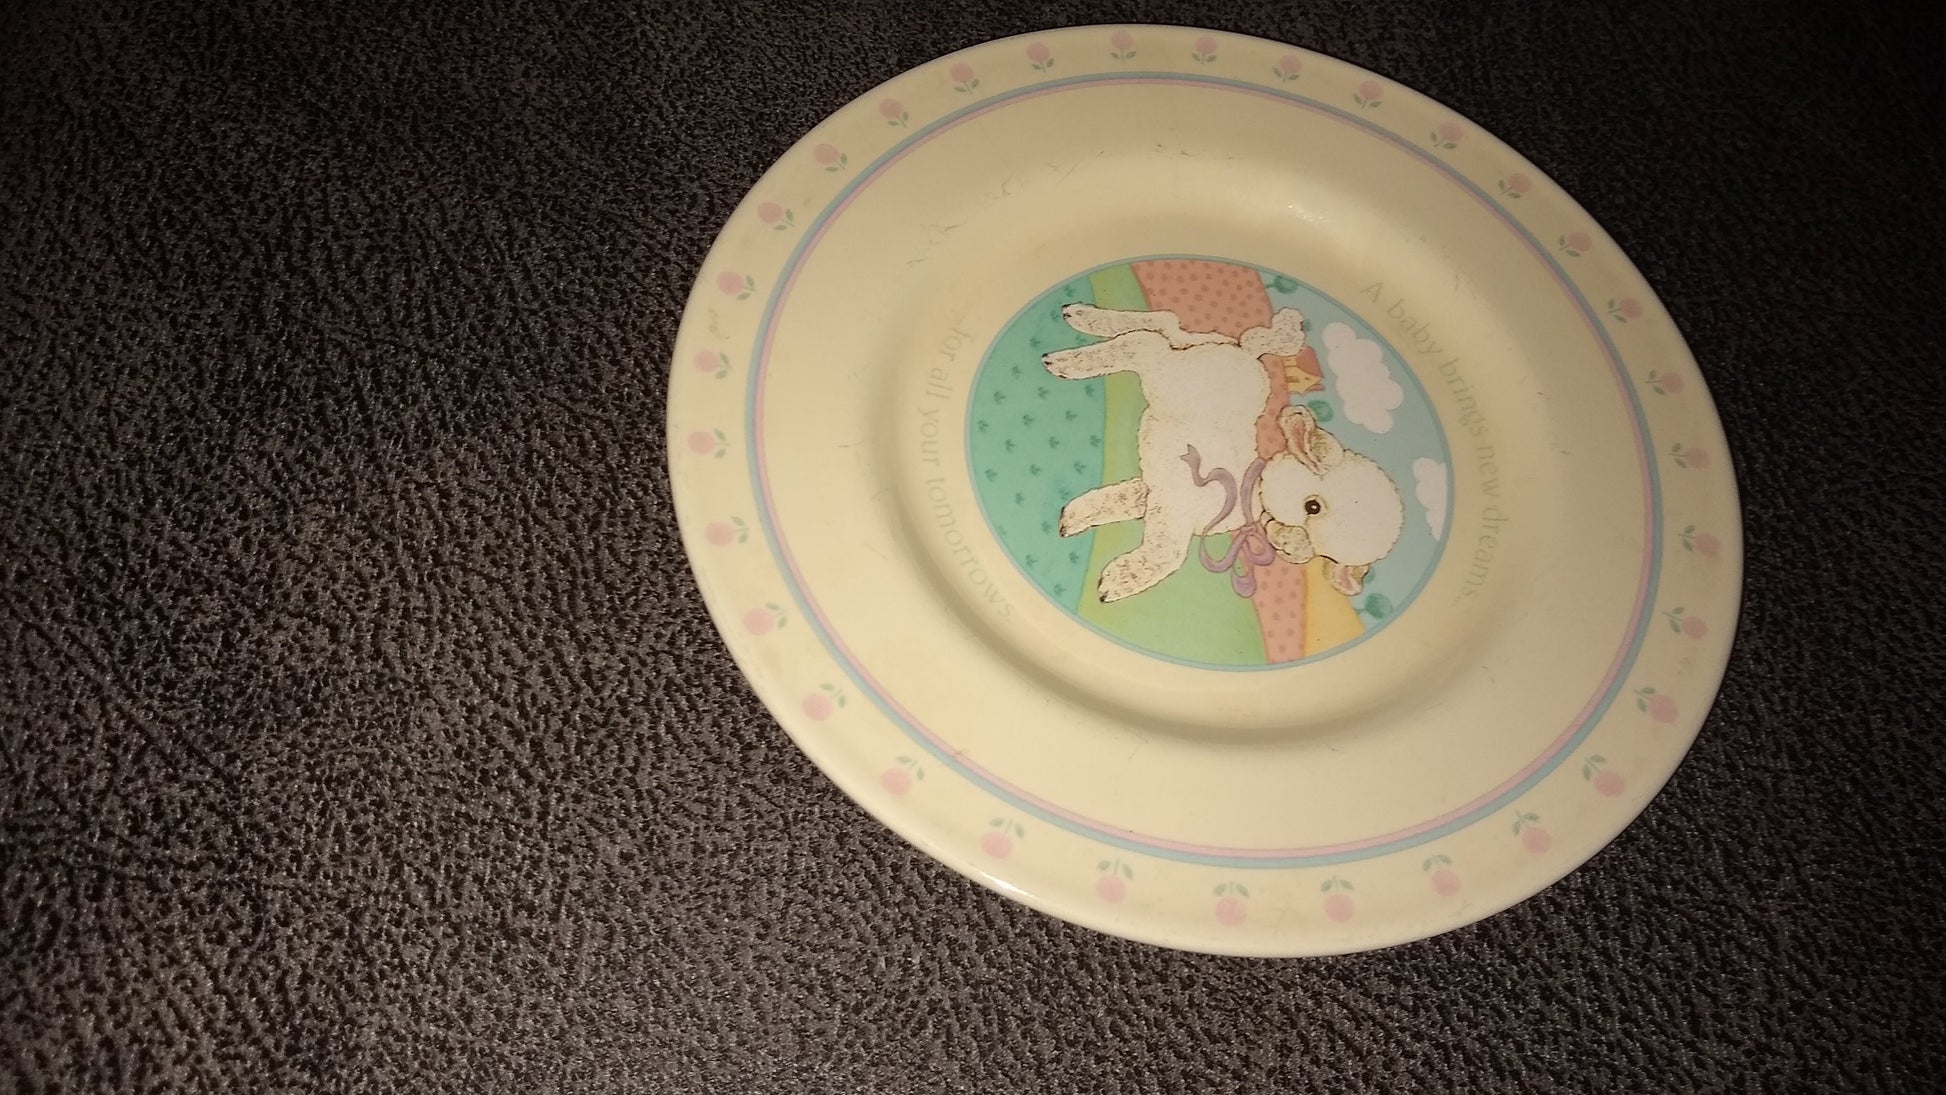 Vintage Hallmark Newborn Baby Plate (Side View) With Sheep, Brings New Dreams. Made in Japan In 1984. 